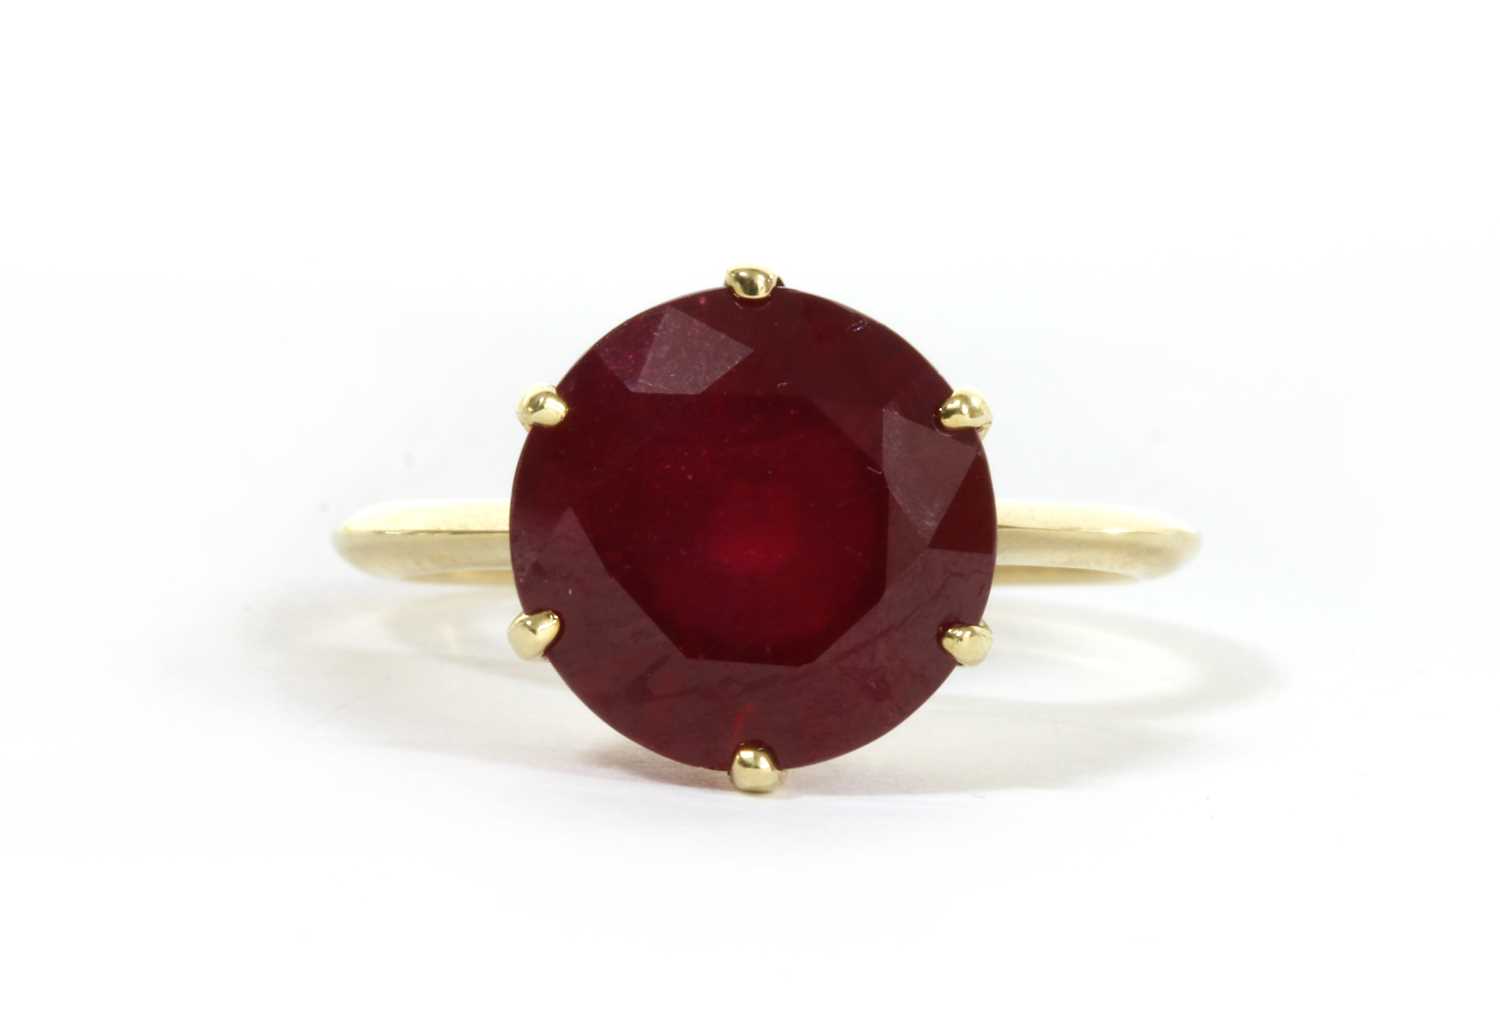 Lot 106 - A gold single stone fracture filled ruby ring